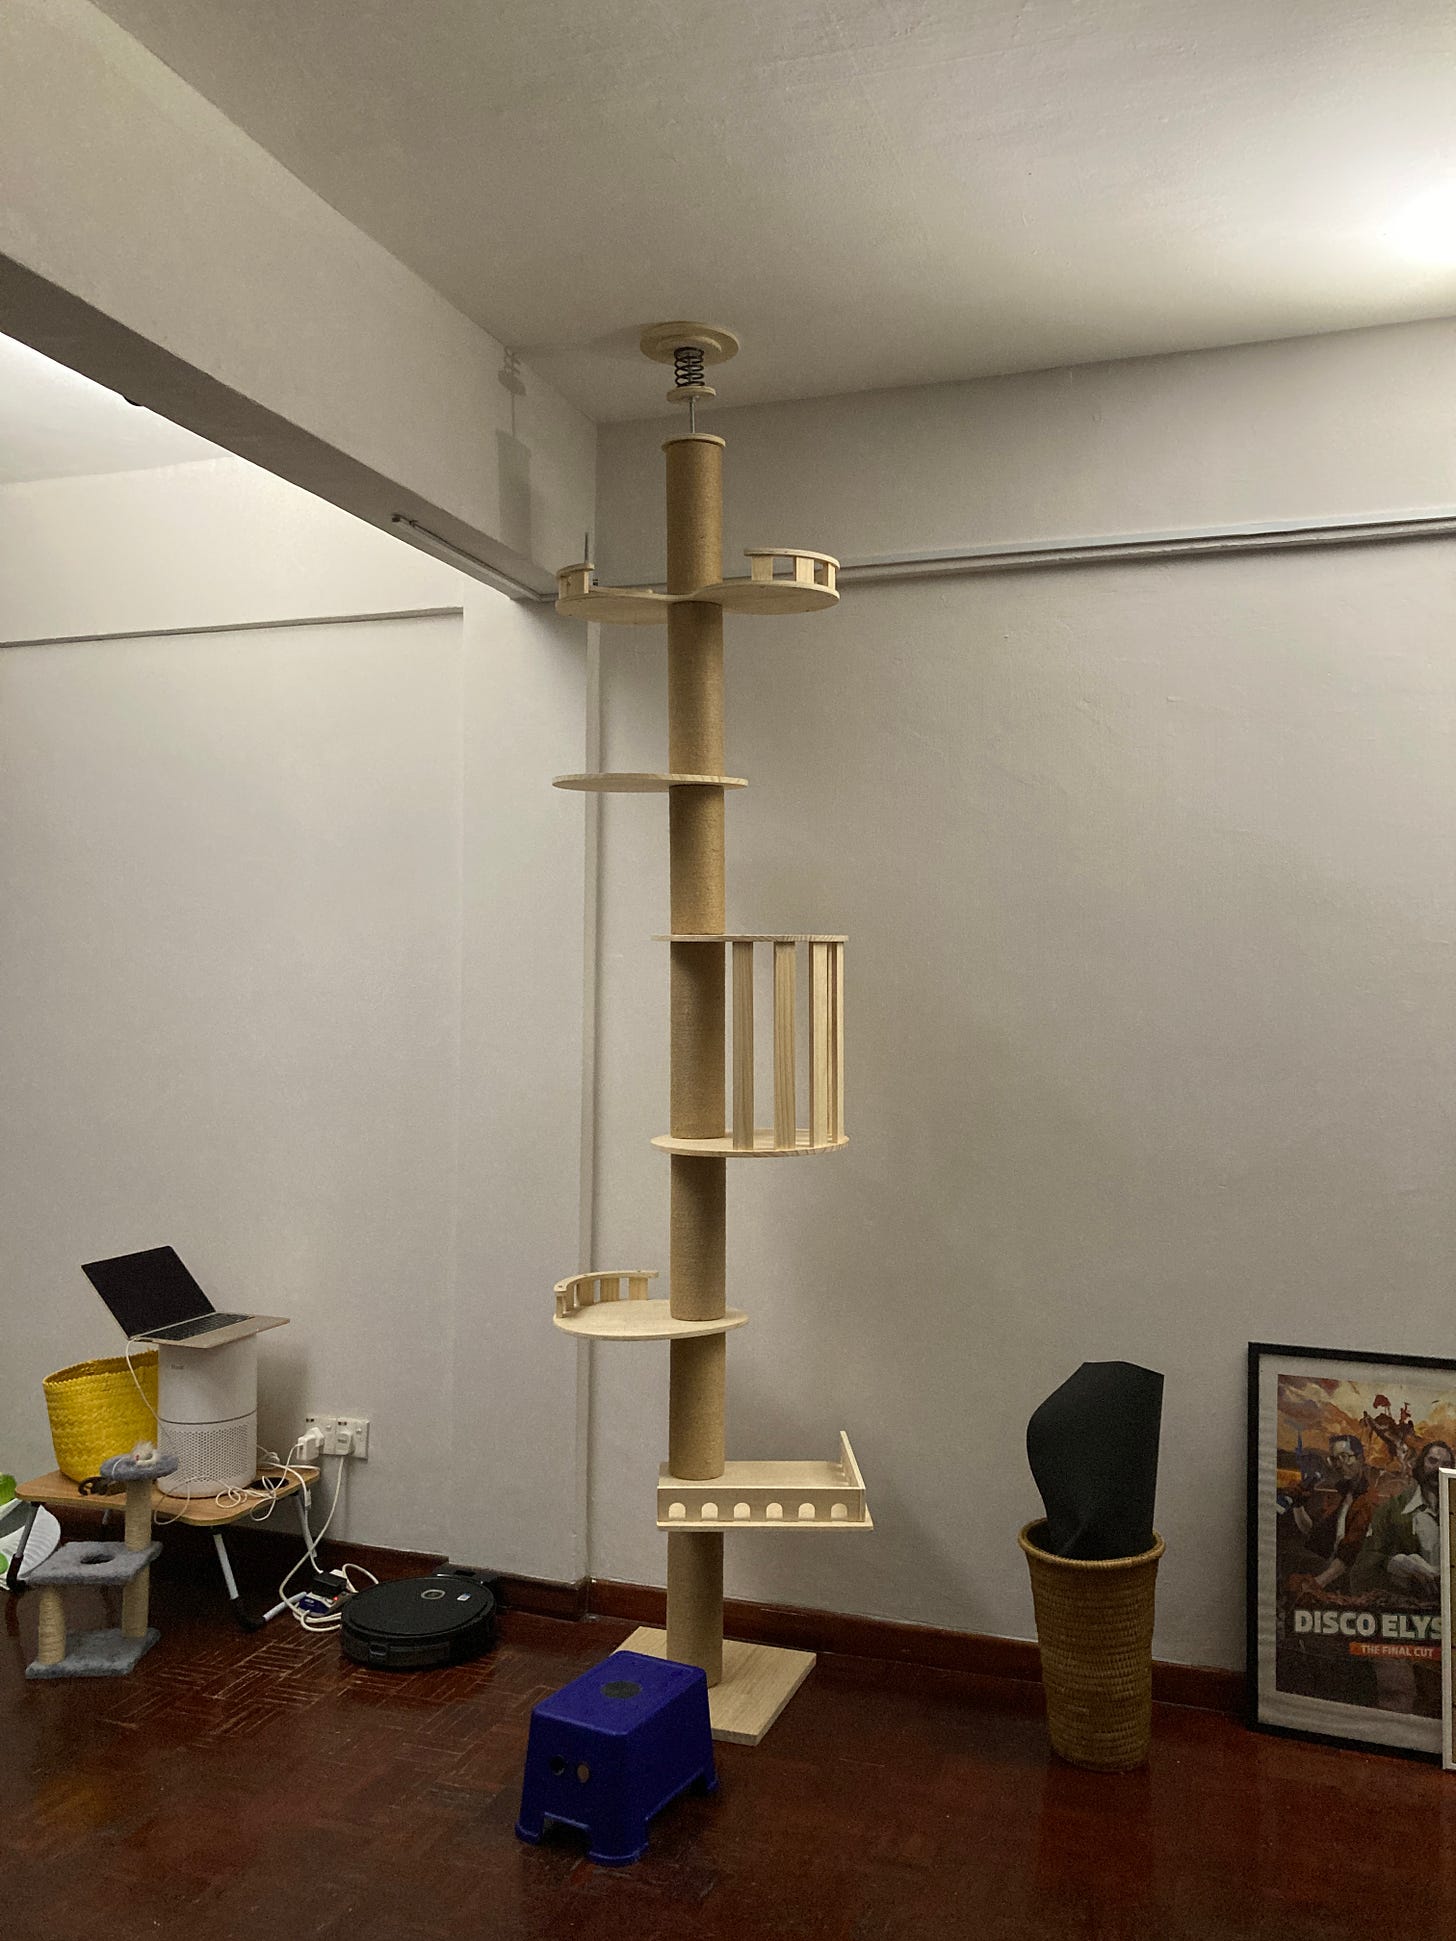 A five level cat tree sits in the corner of a room, lit brightly on either side